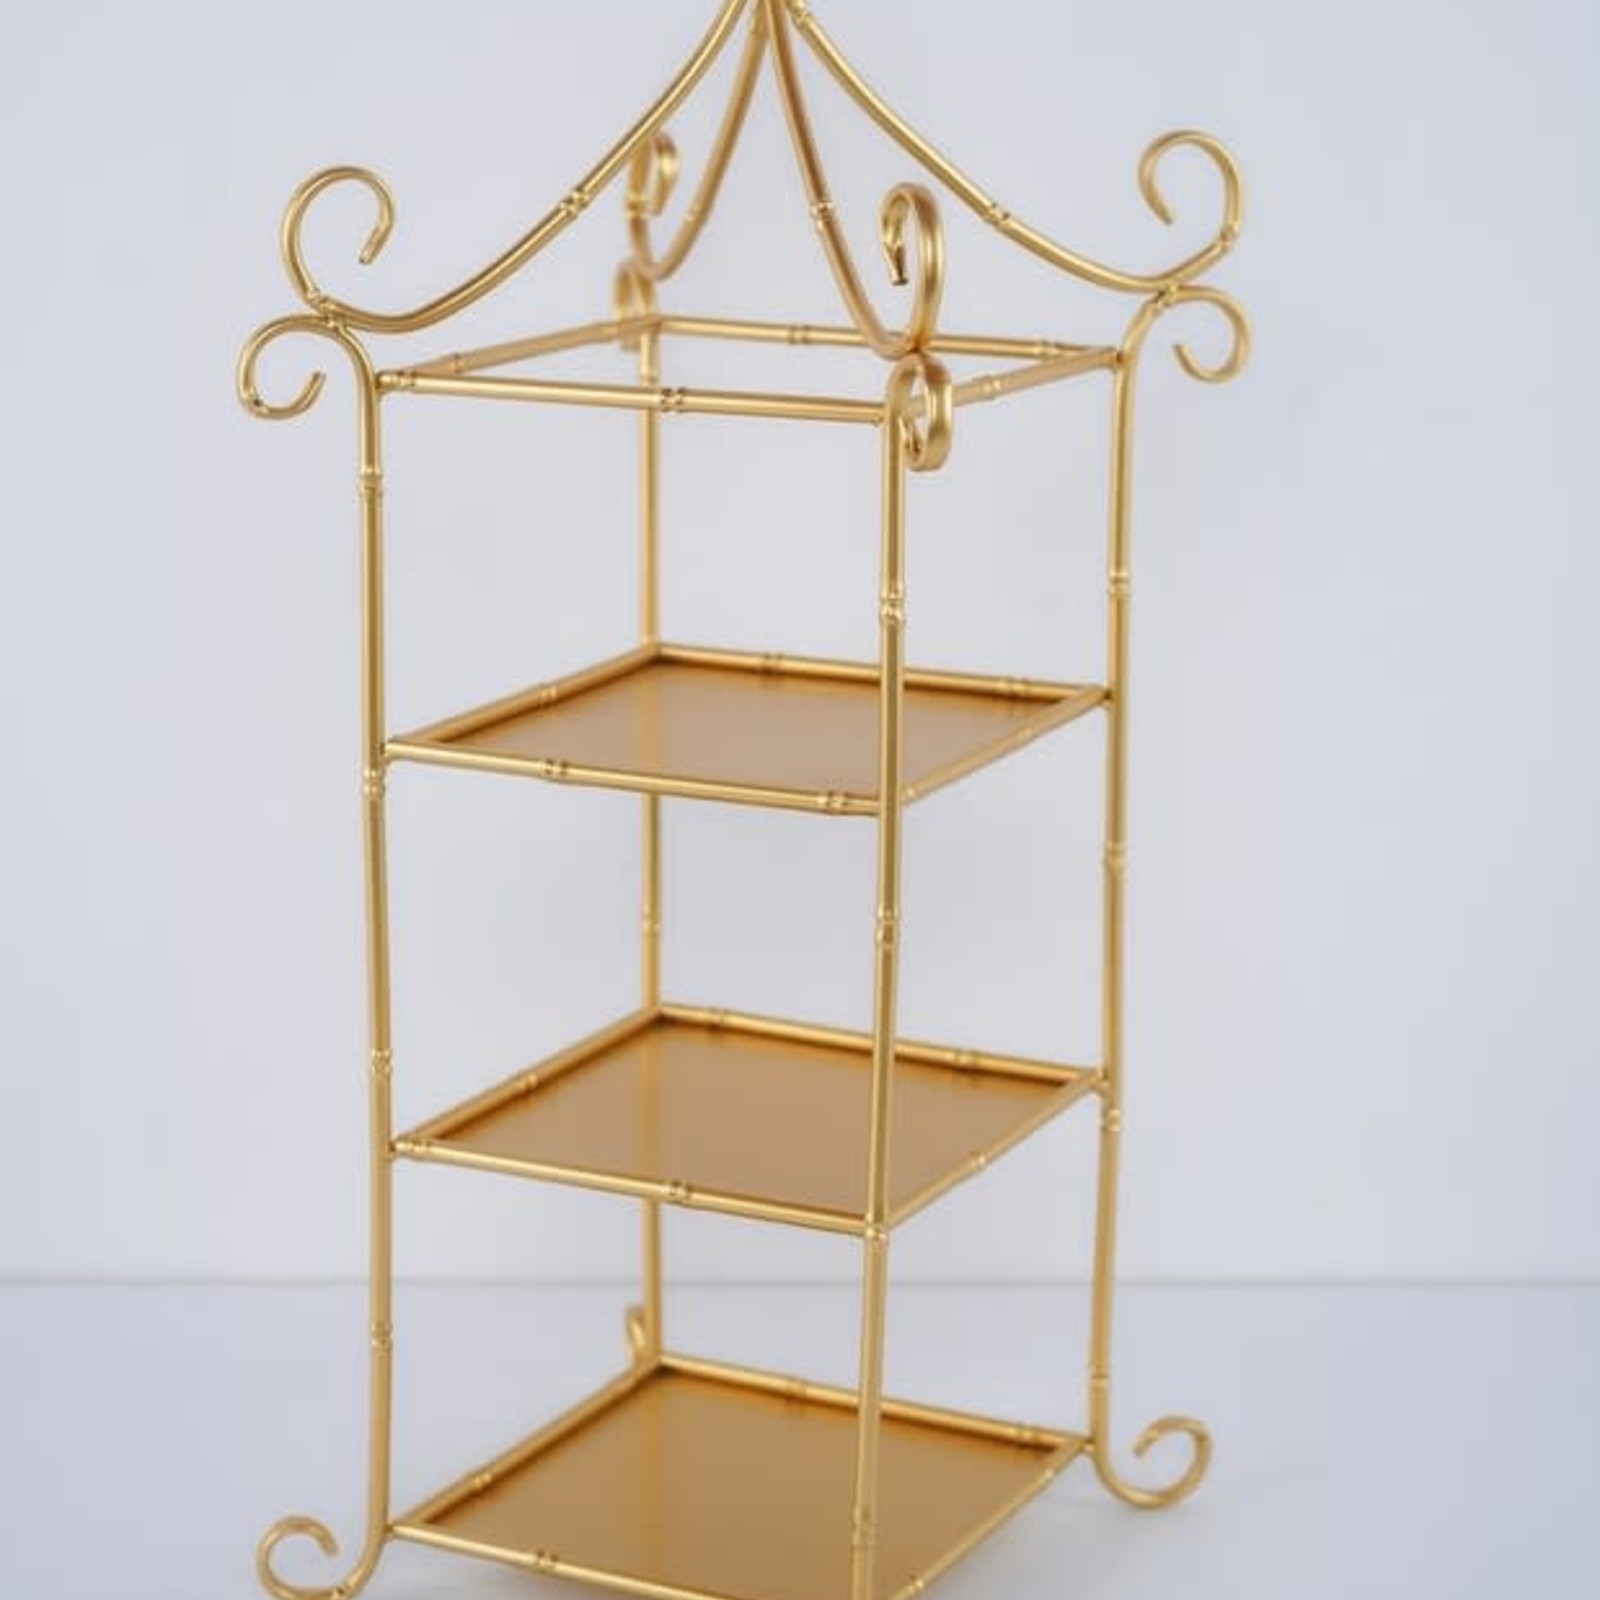 Trade Cie 24" Metal Bamboo Etagere, Gold   HD6084 loading=